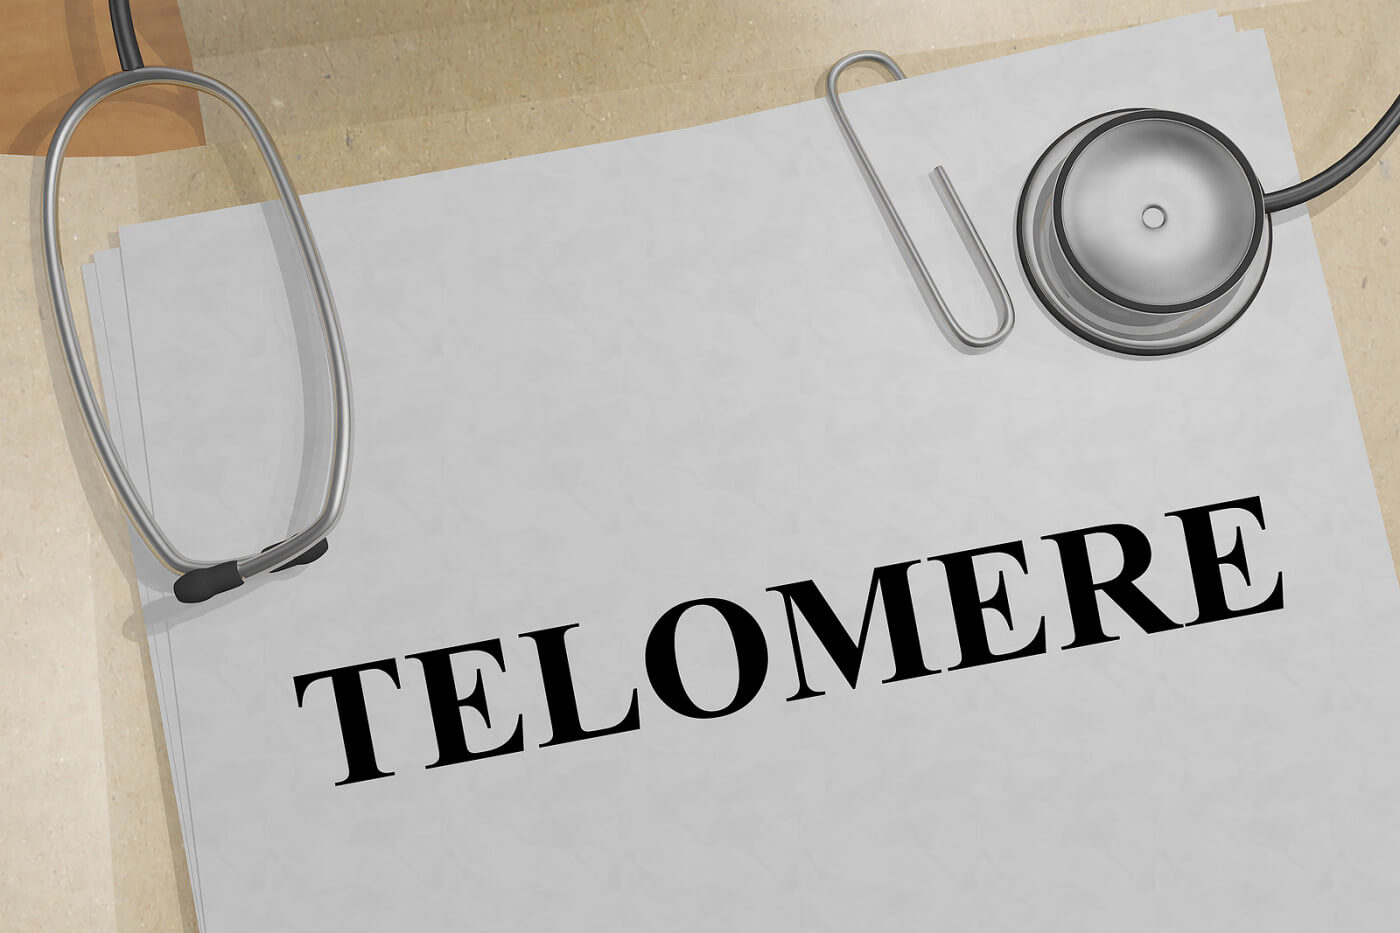 Telomeres and Muscular Dystrophy